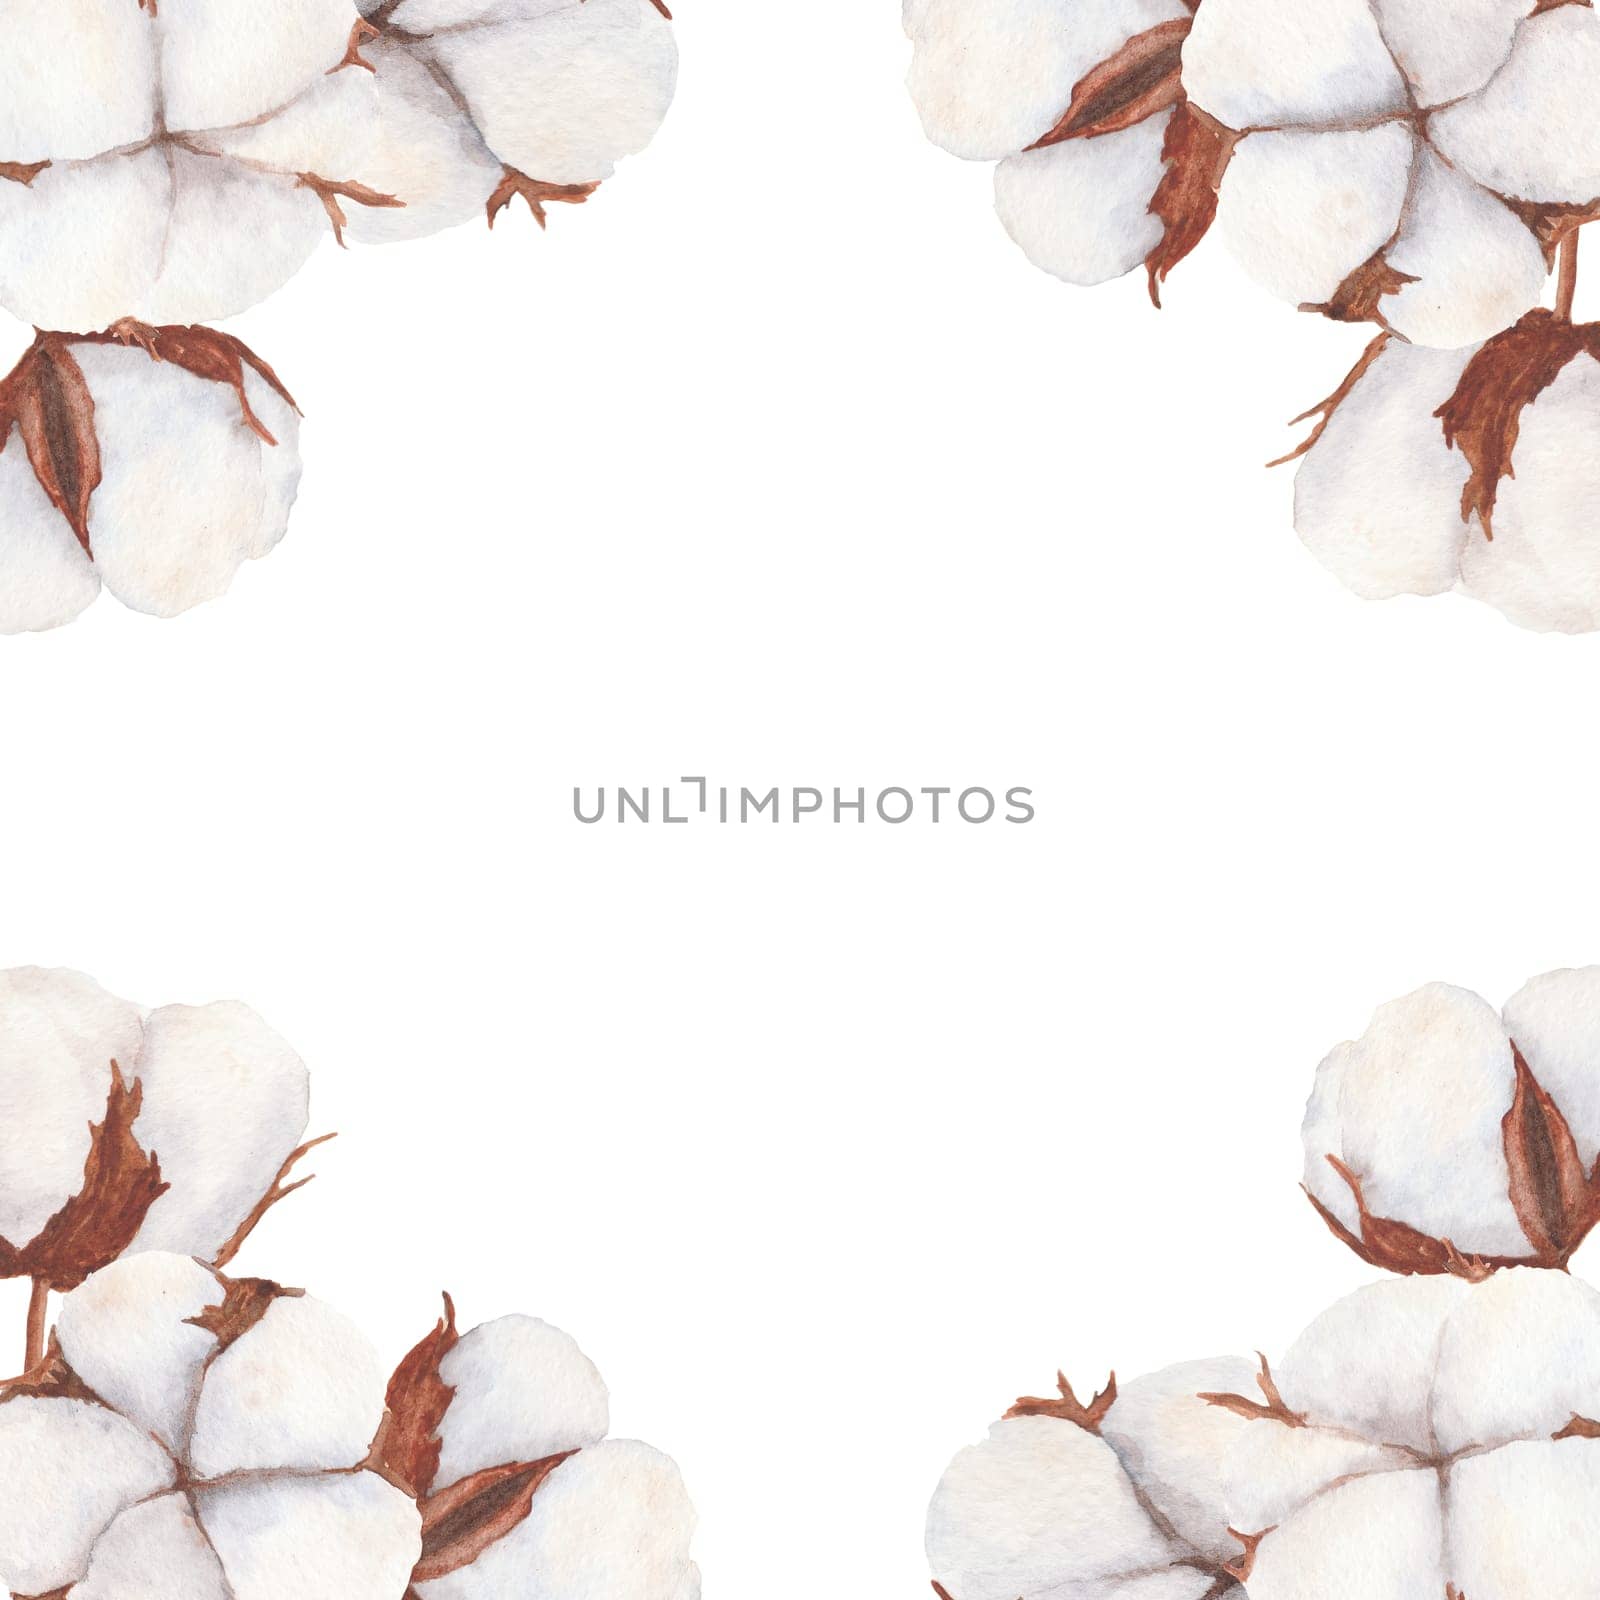 Cotton bolls watercolor illustration isolated on white background. Hand drawn frame by florainlove_art